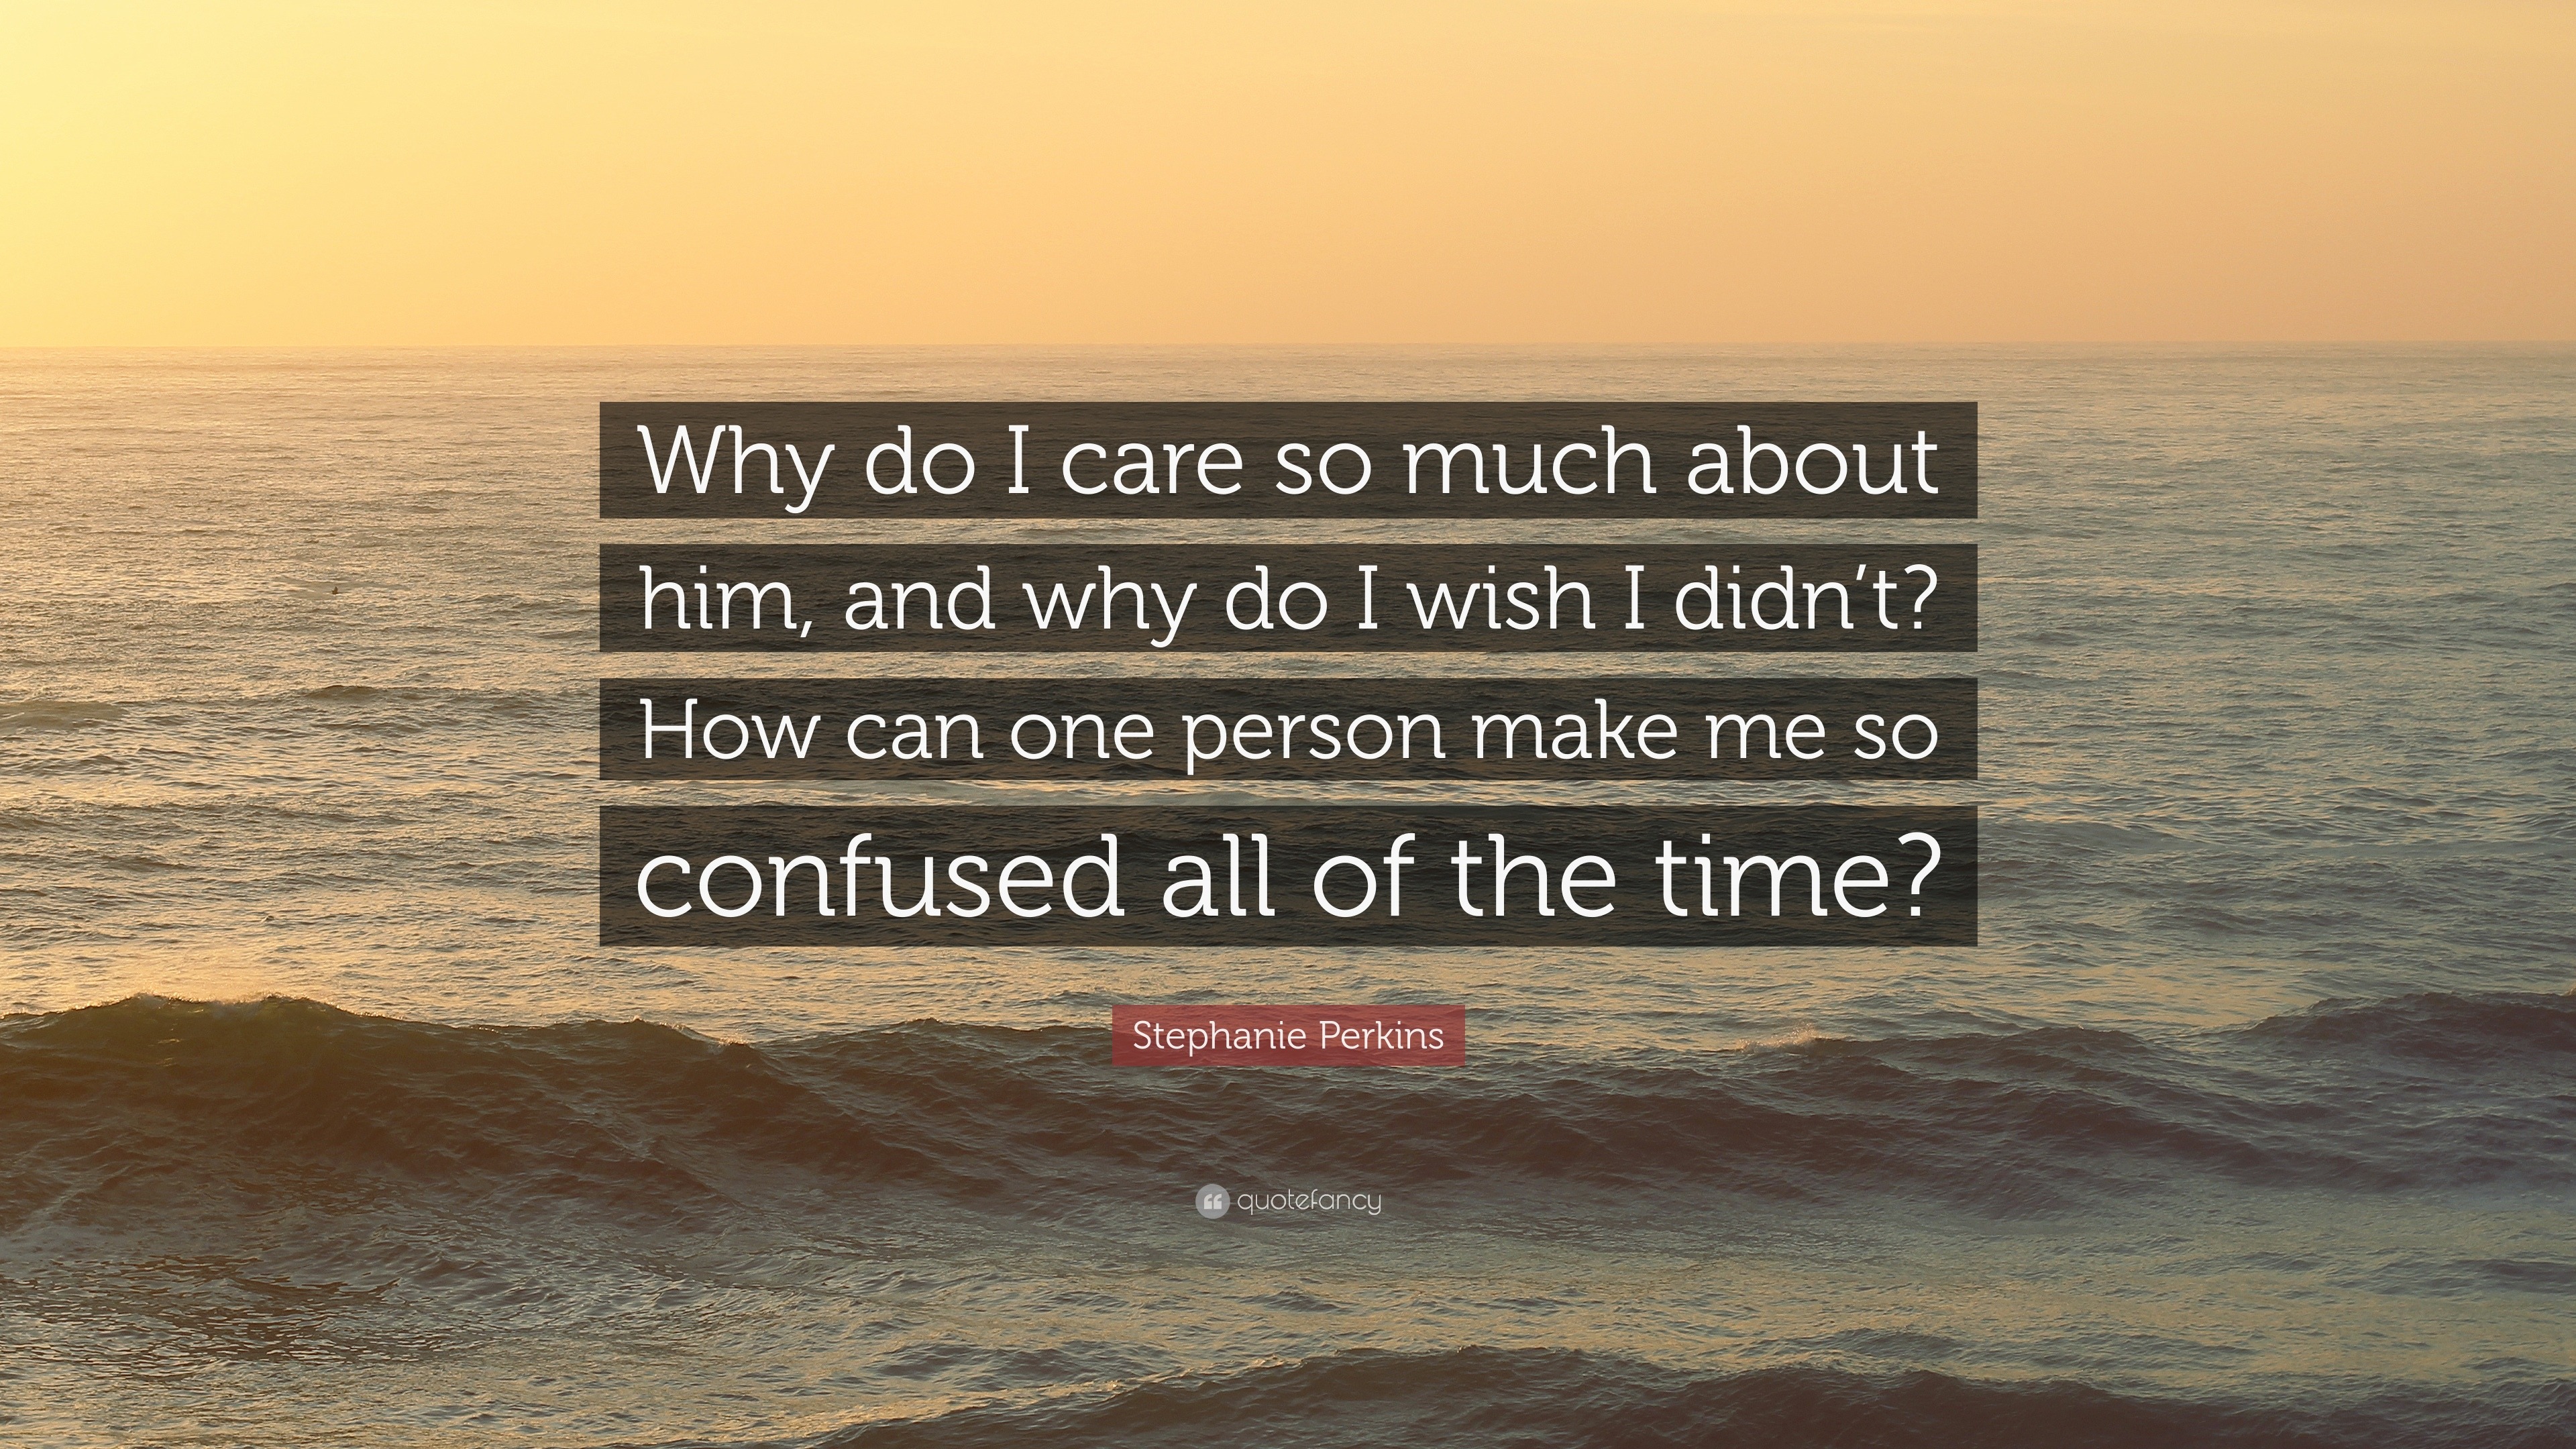 Stephanie Perkins Quote: “Why do I care so much about him ...